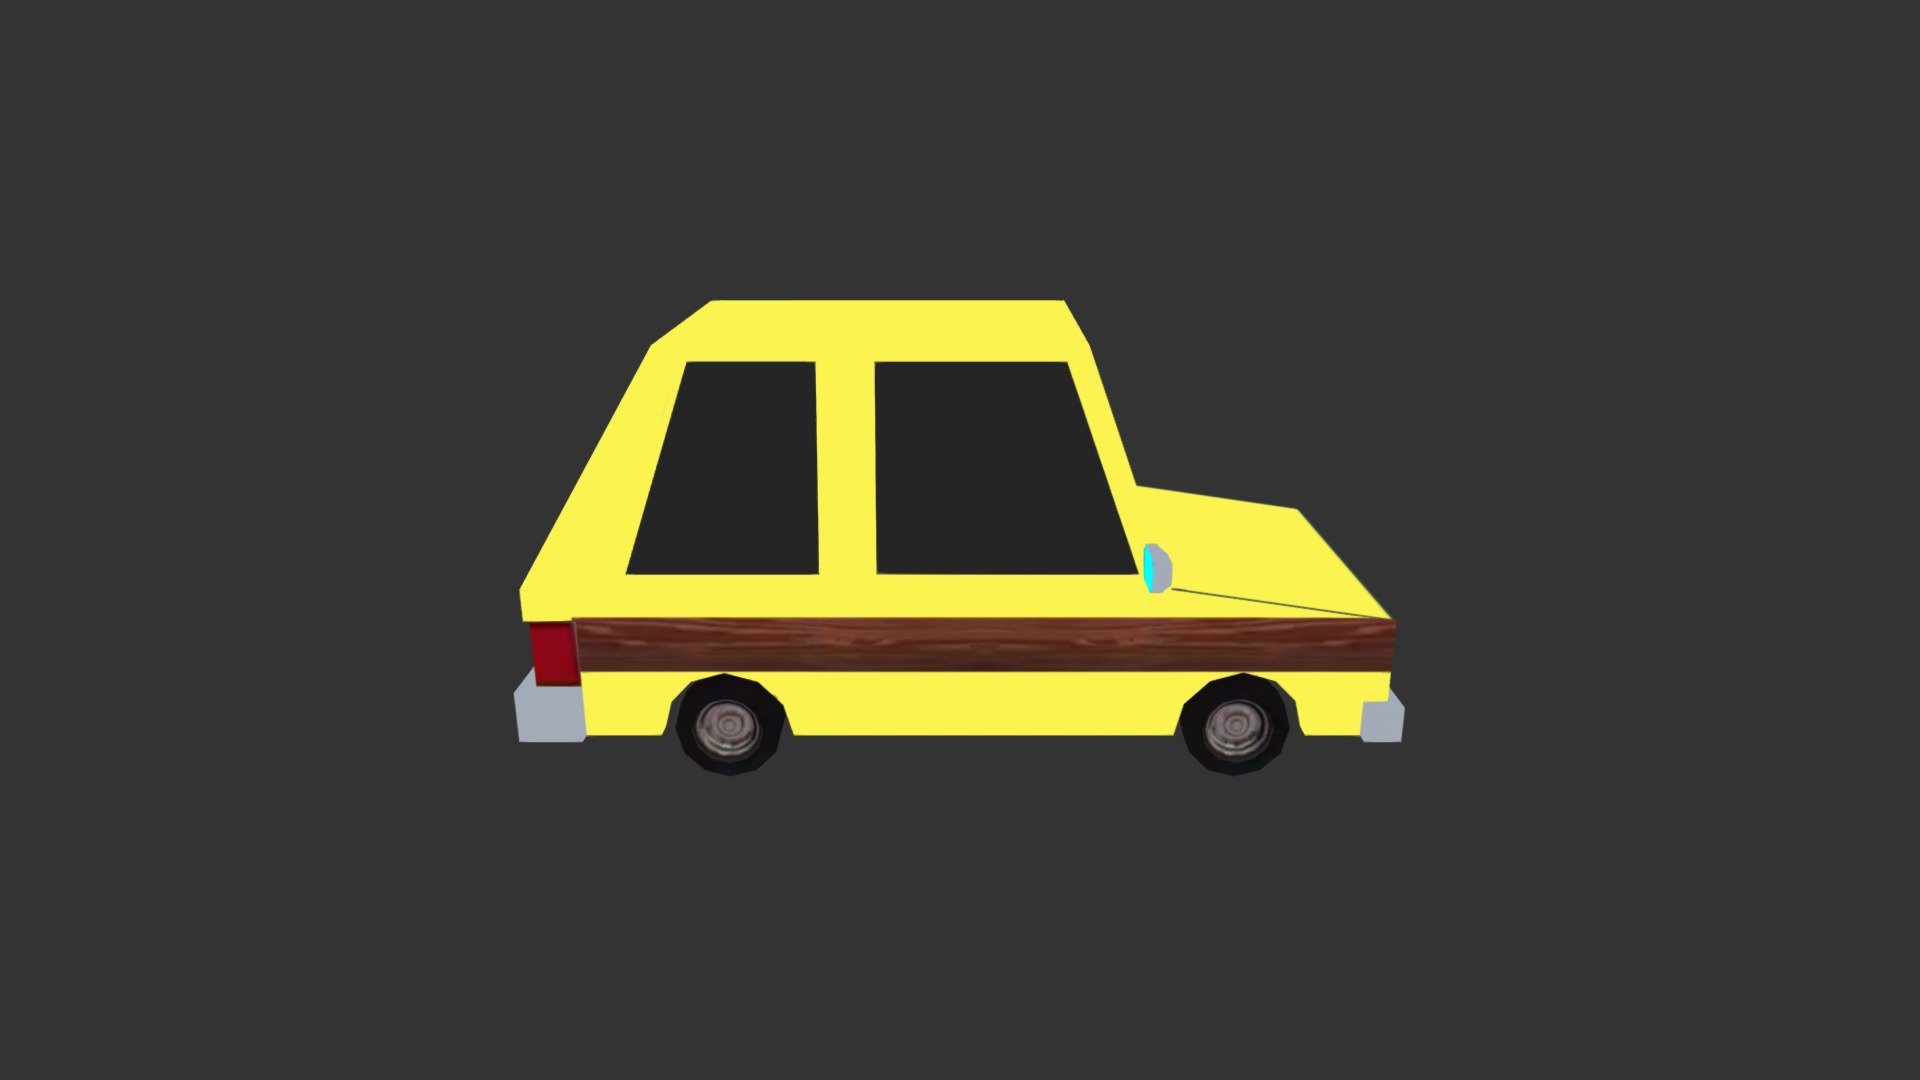 Low-poly car inspired by a cartoon - Jake Bellows 1-30-18 Car Toon - 3D model by JakeBellows 3d model